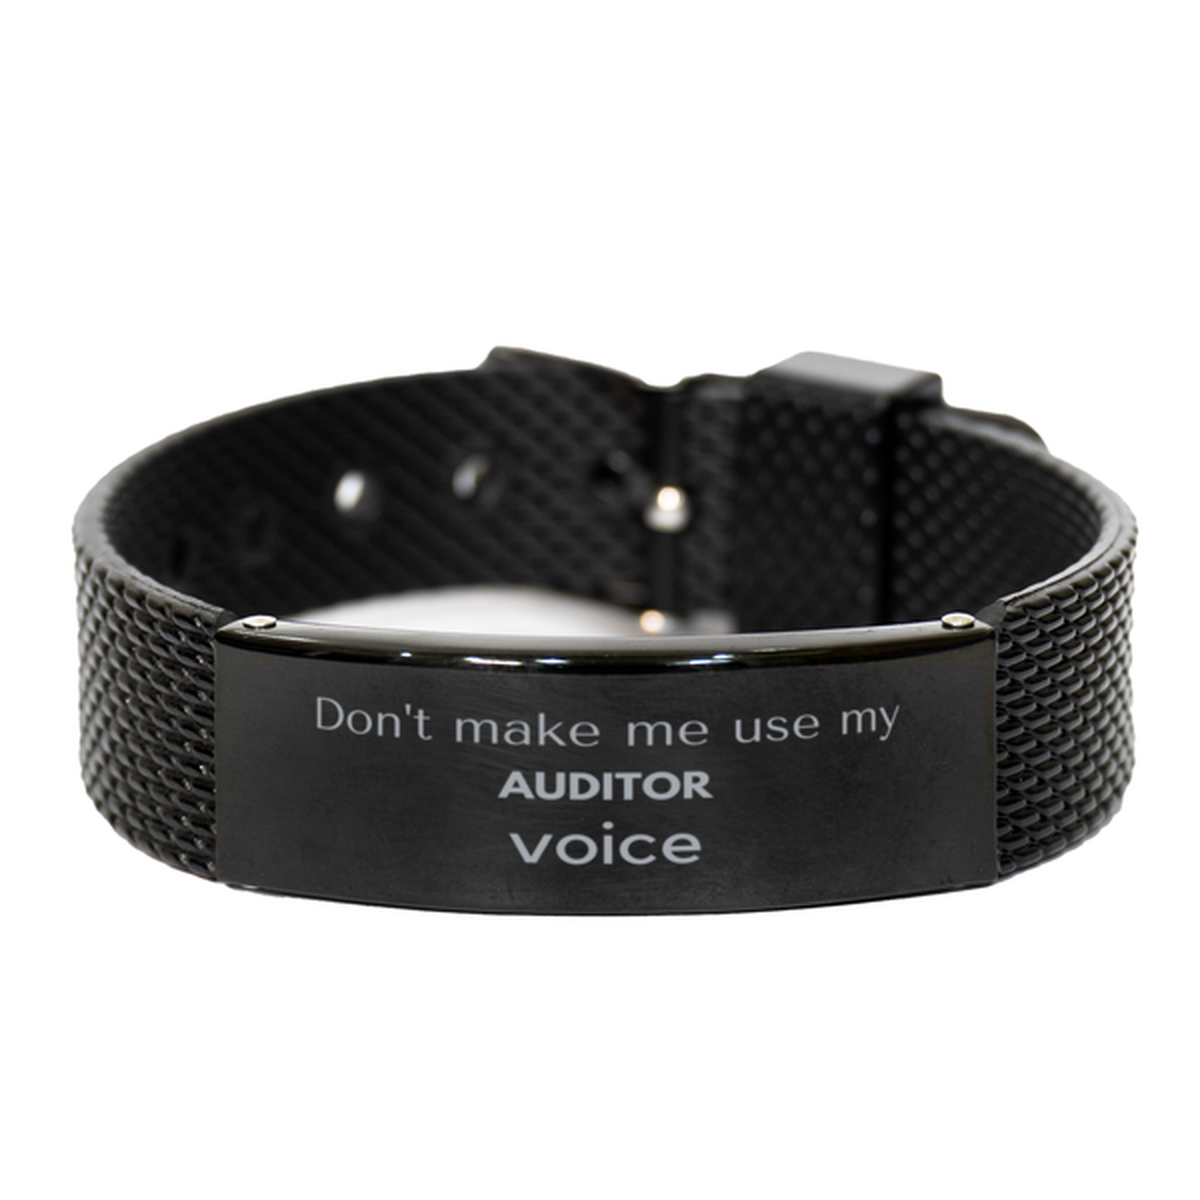 Don't make me use my Auditor voice, Sarcasm Auditor Gifts, Christmas Auditor Black Shark Mesh Bracelet Birthday Unique Gifts For Auditor Coworkers, Men, Women, Colleague, Friends